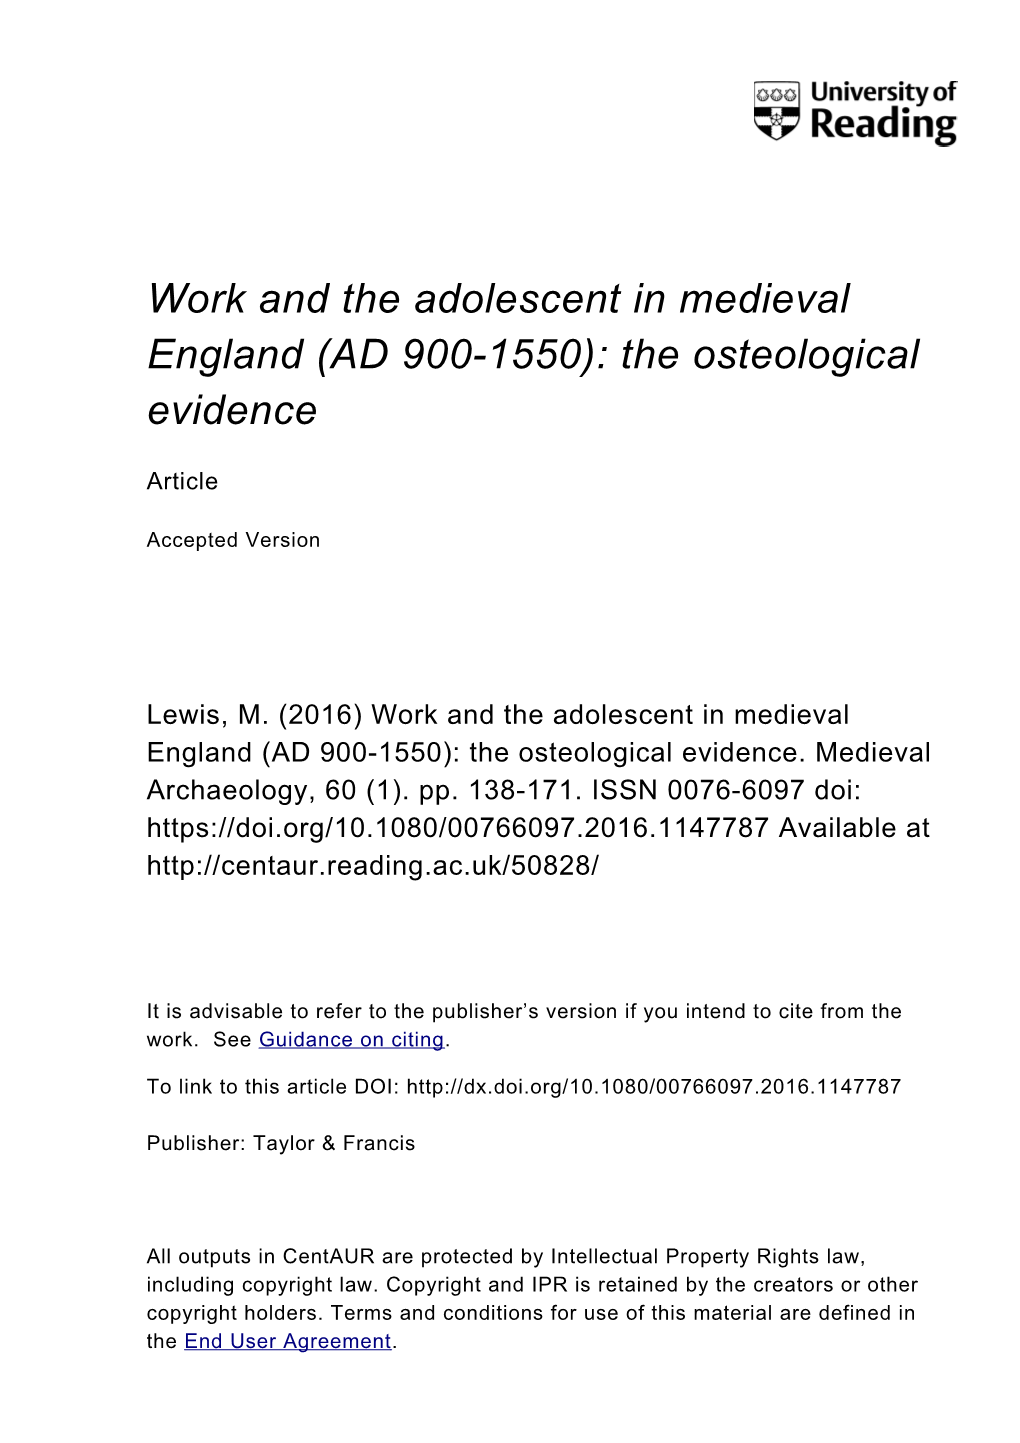 Work and the Adolescent in Medieval England (AD 900-1550): the Osteological Evidence